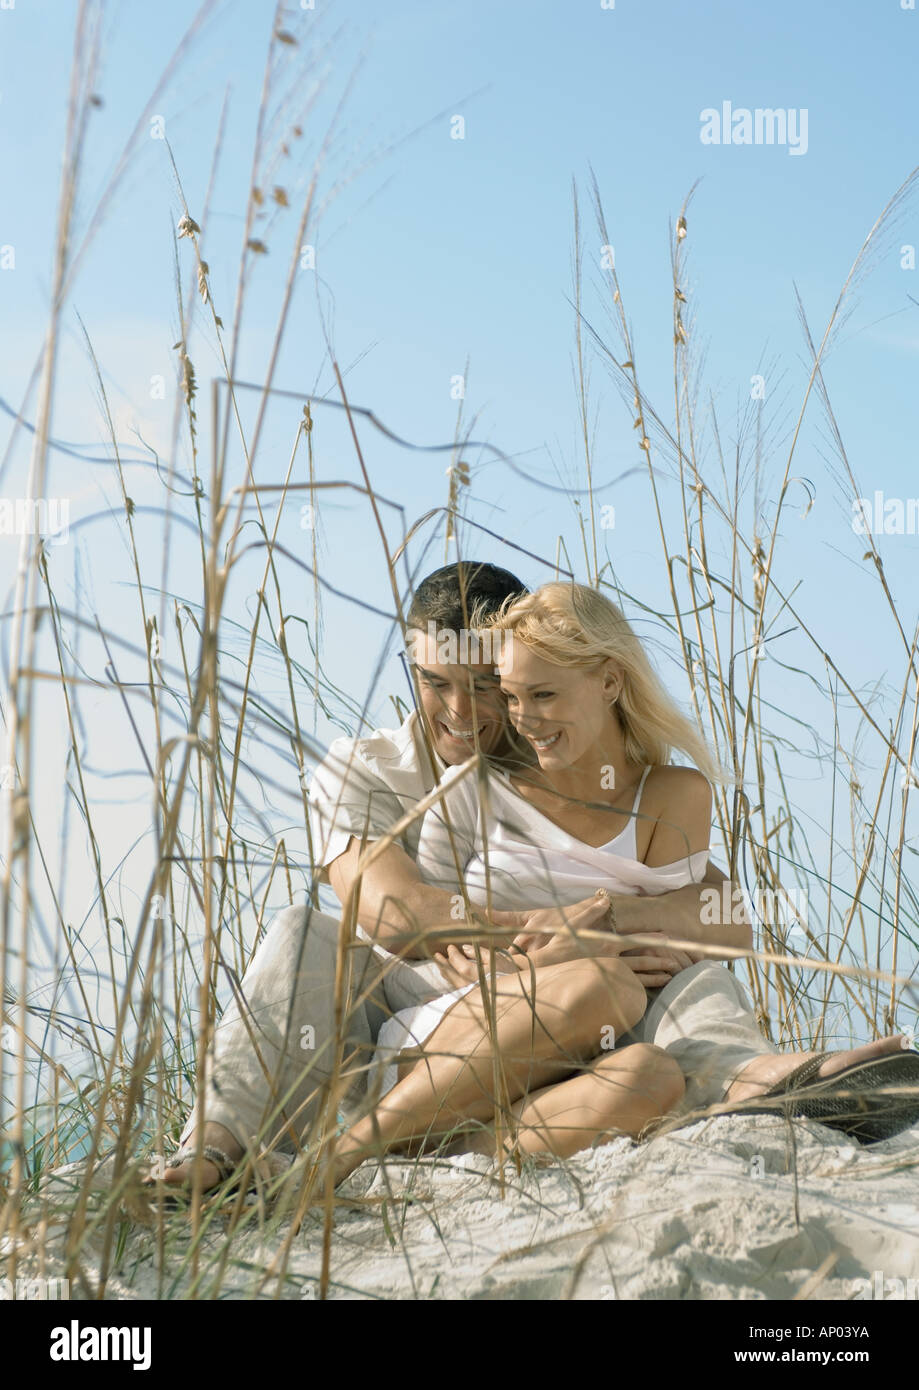 Couple sitting in dune grass, embracing Stock Photo